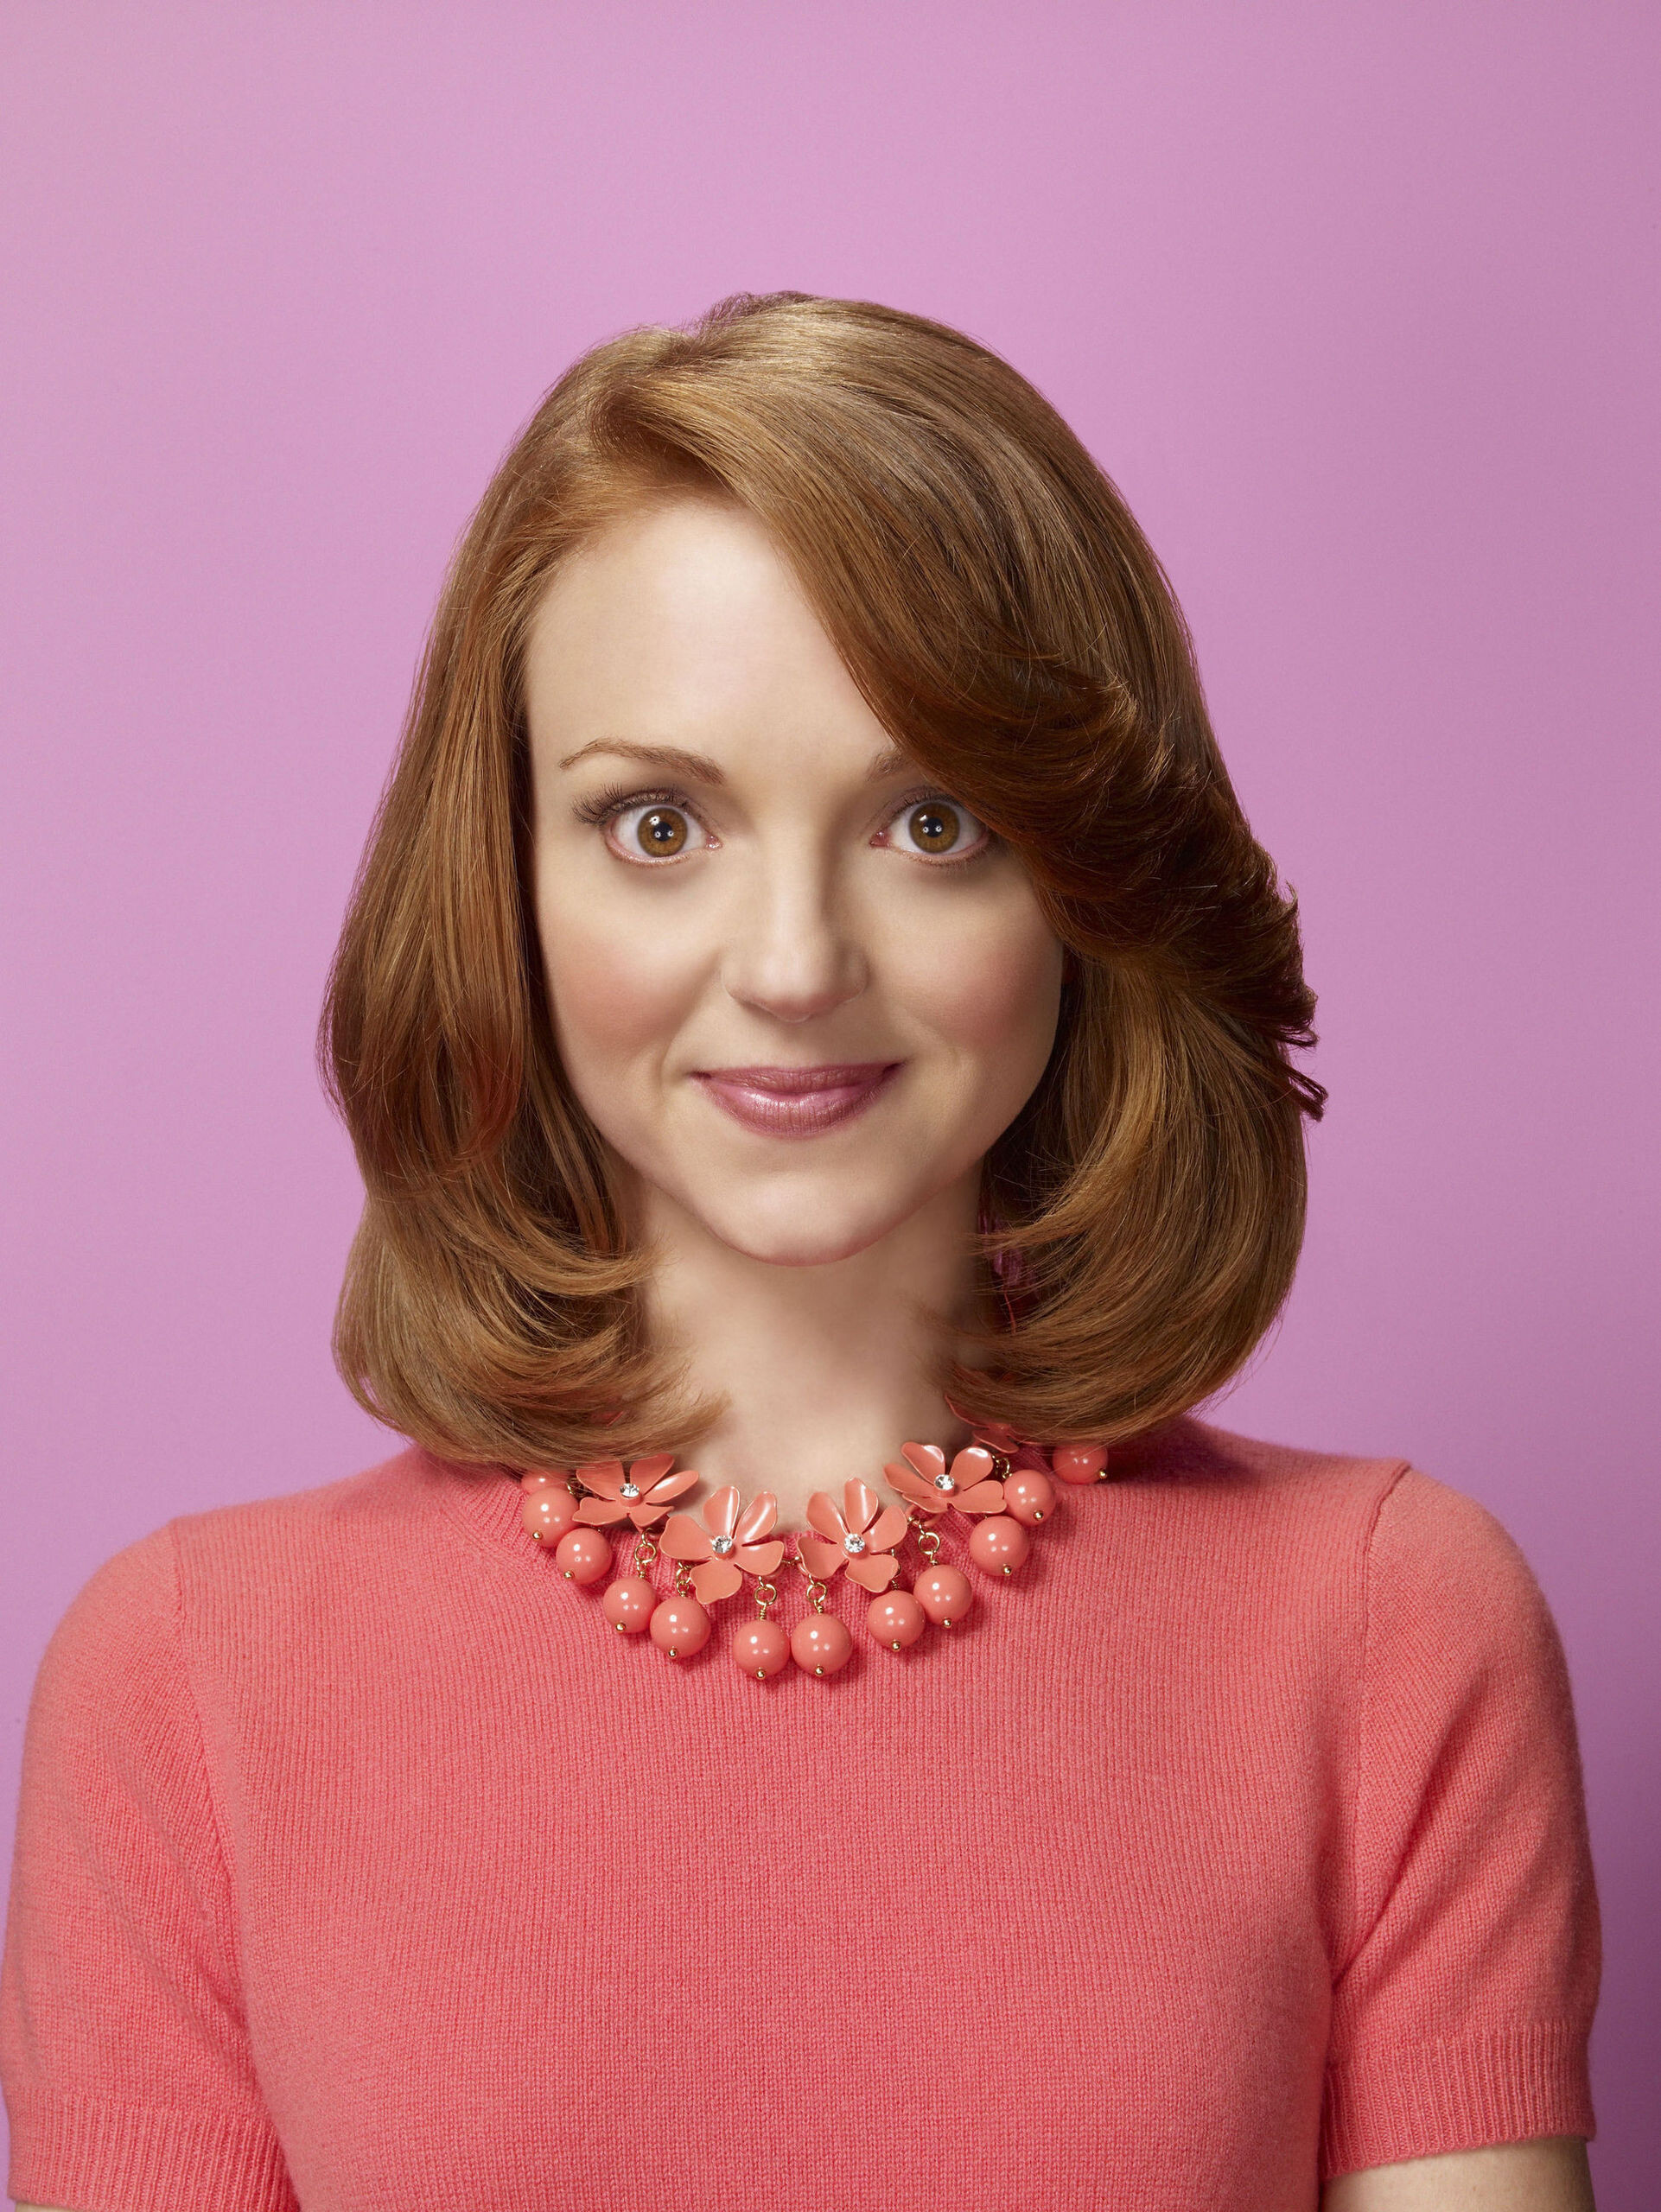 Glee (TV series): Jayma Mays as Emma Pillsbury, A guidance counselor at the William McKinley High School. 1930x2560 HD Wallpaper.